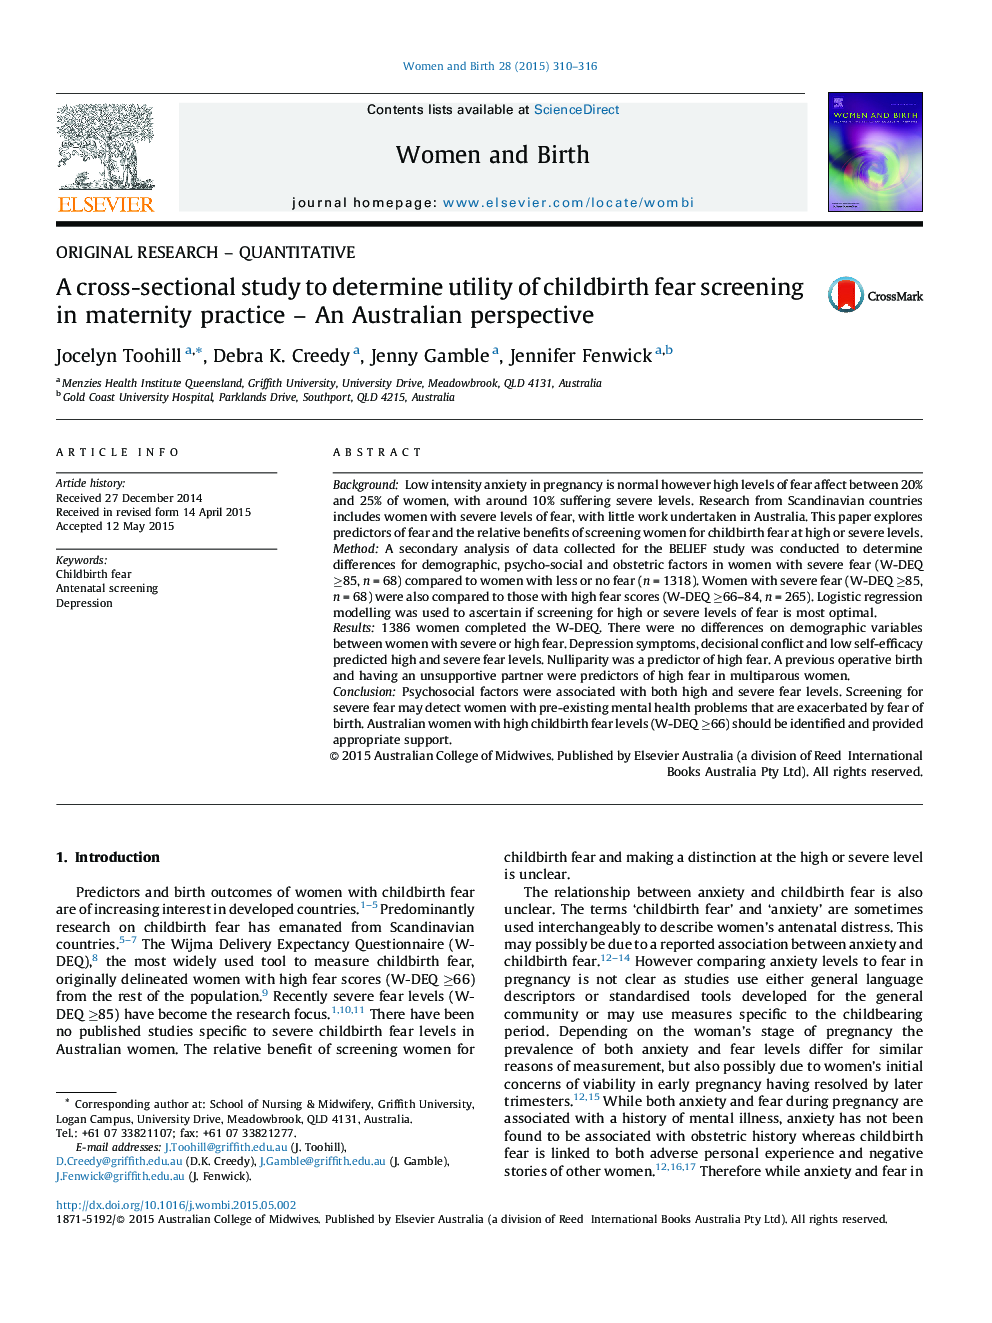 A cross-sectional study to determine utility of childbirth fear screening in maternity practice – An Australian perspective